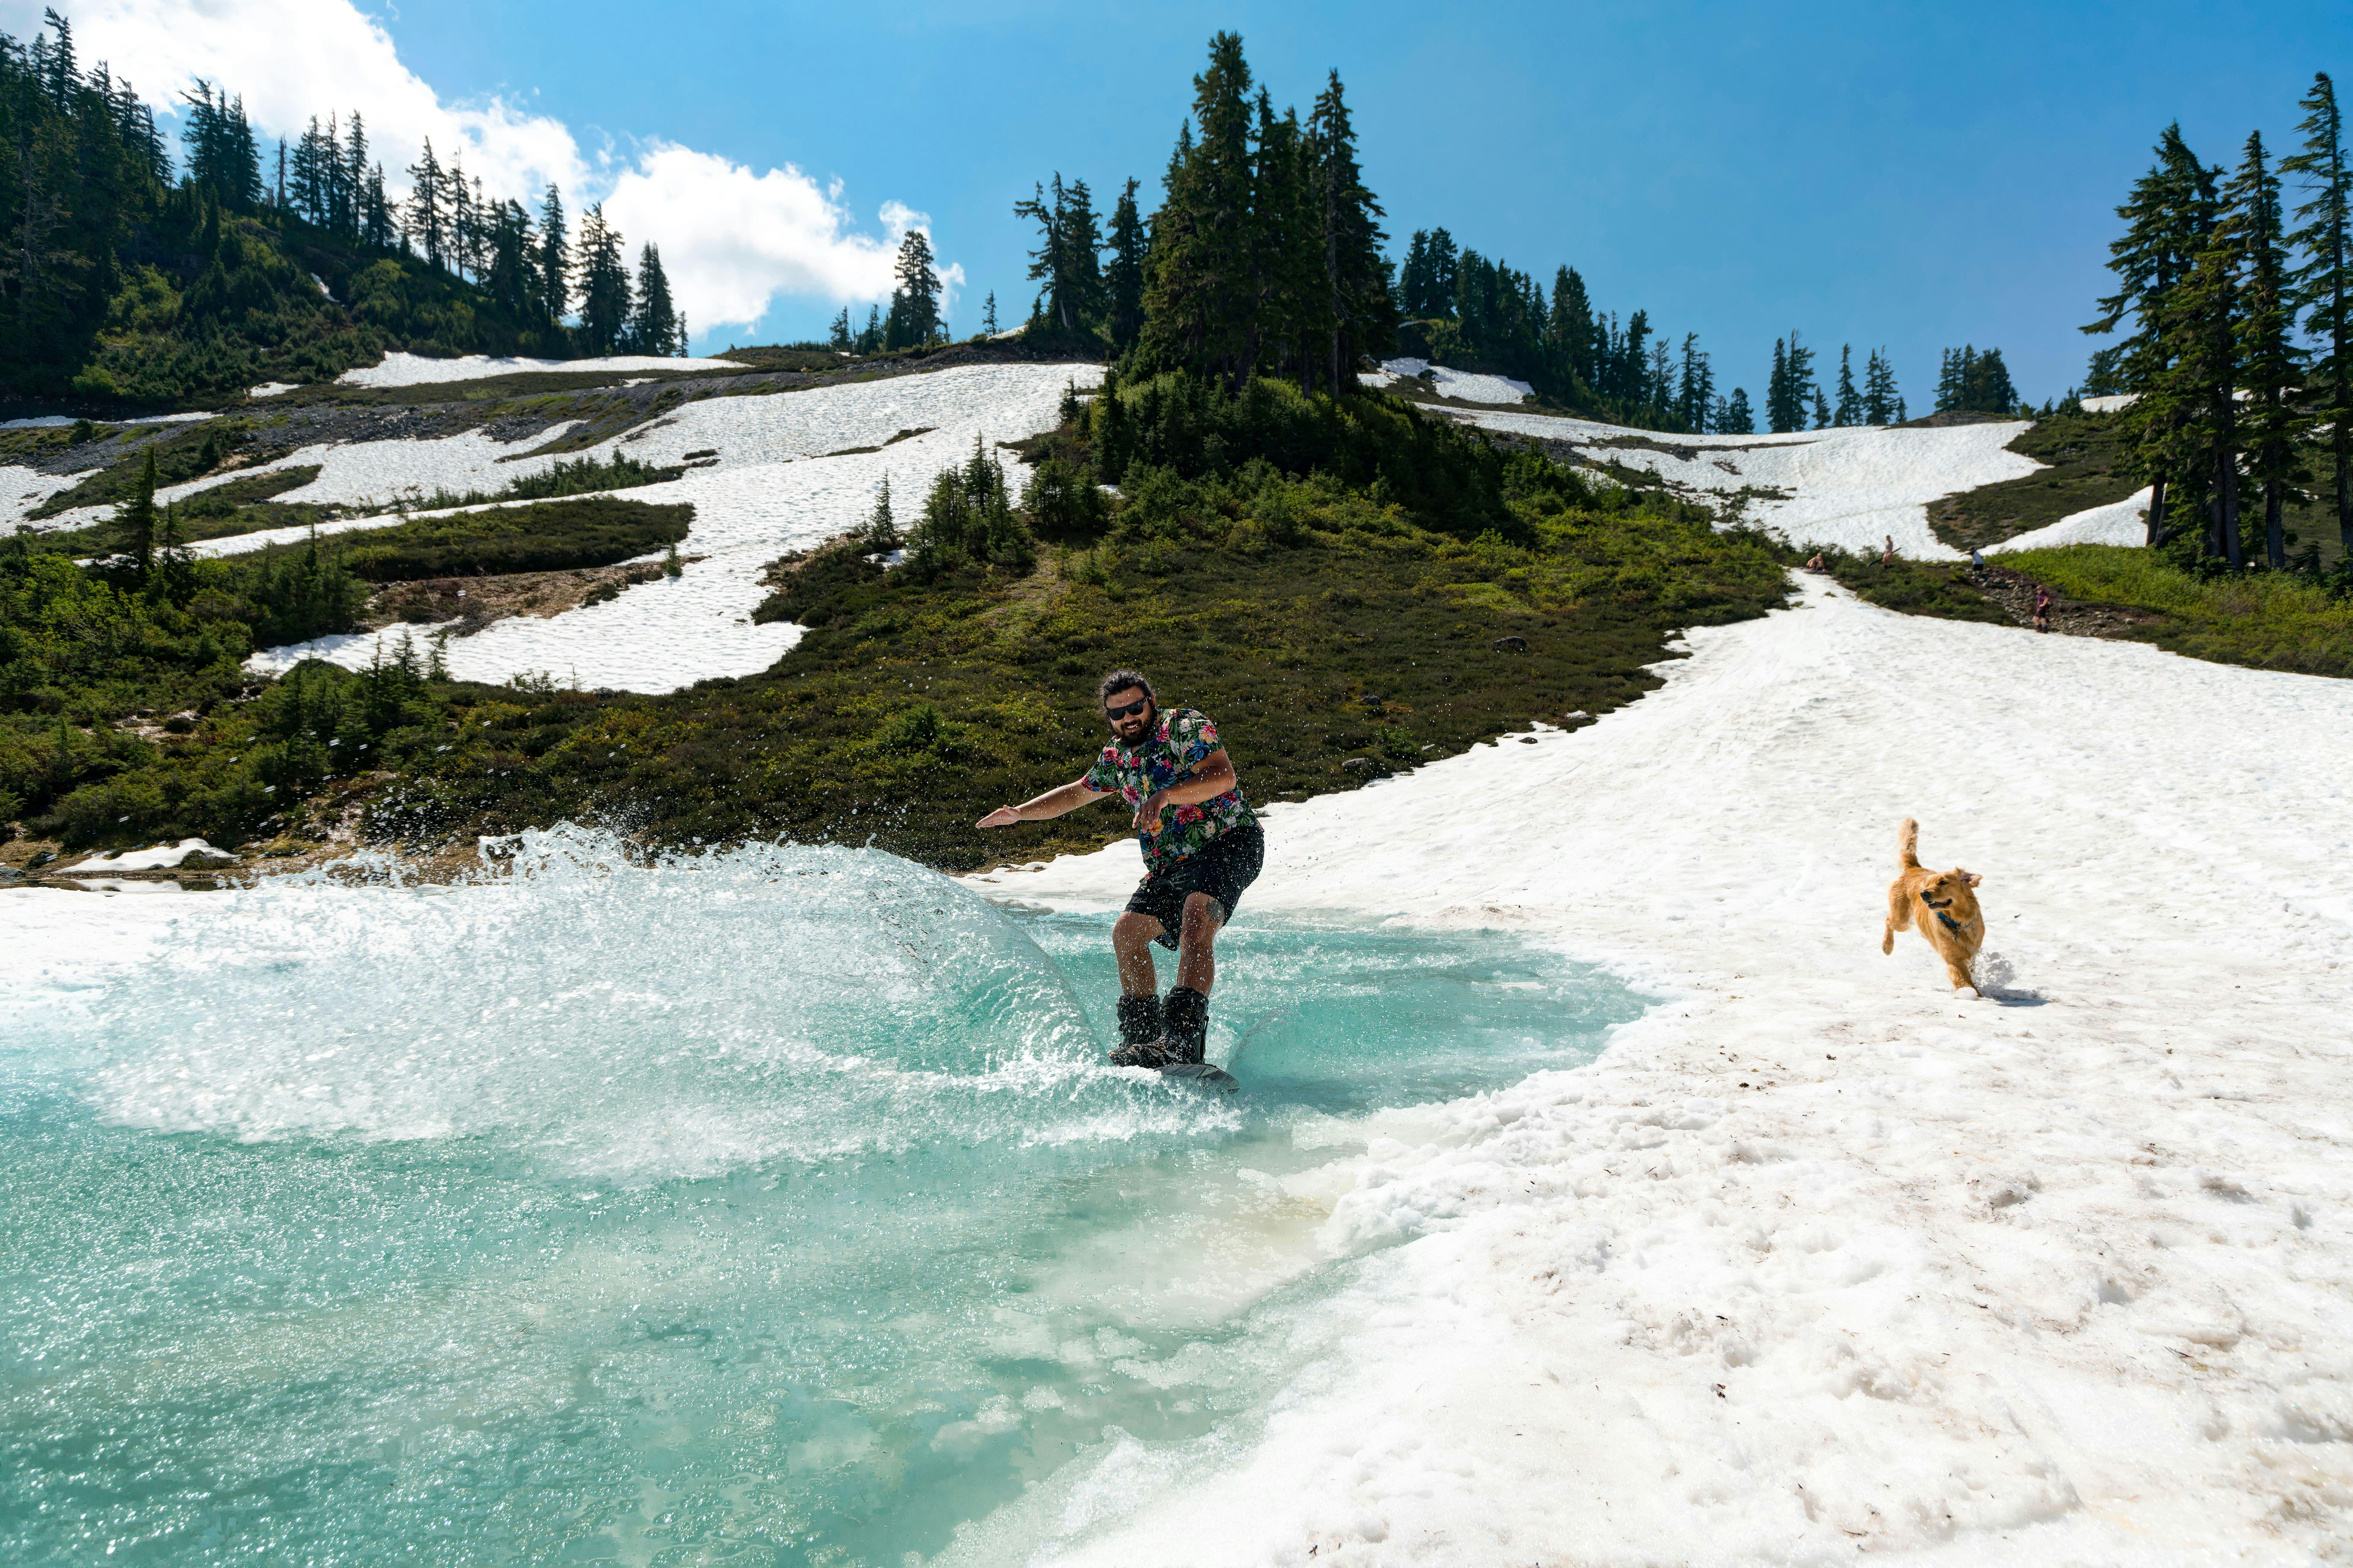 Skier on Melted Snow. Heather Meadows, North Cascades National Park, Washington State, USA